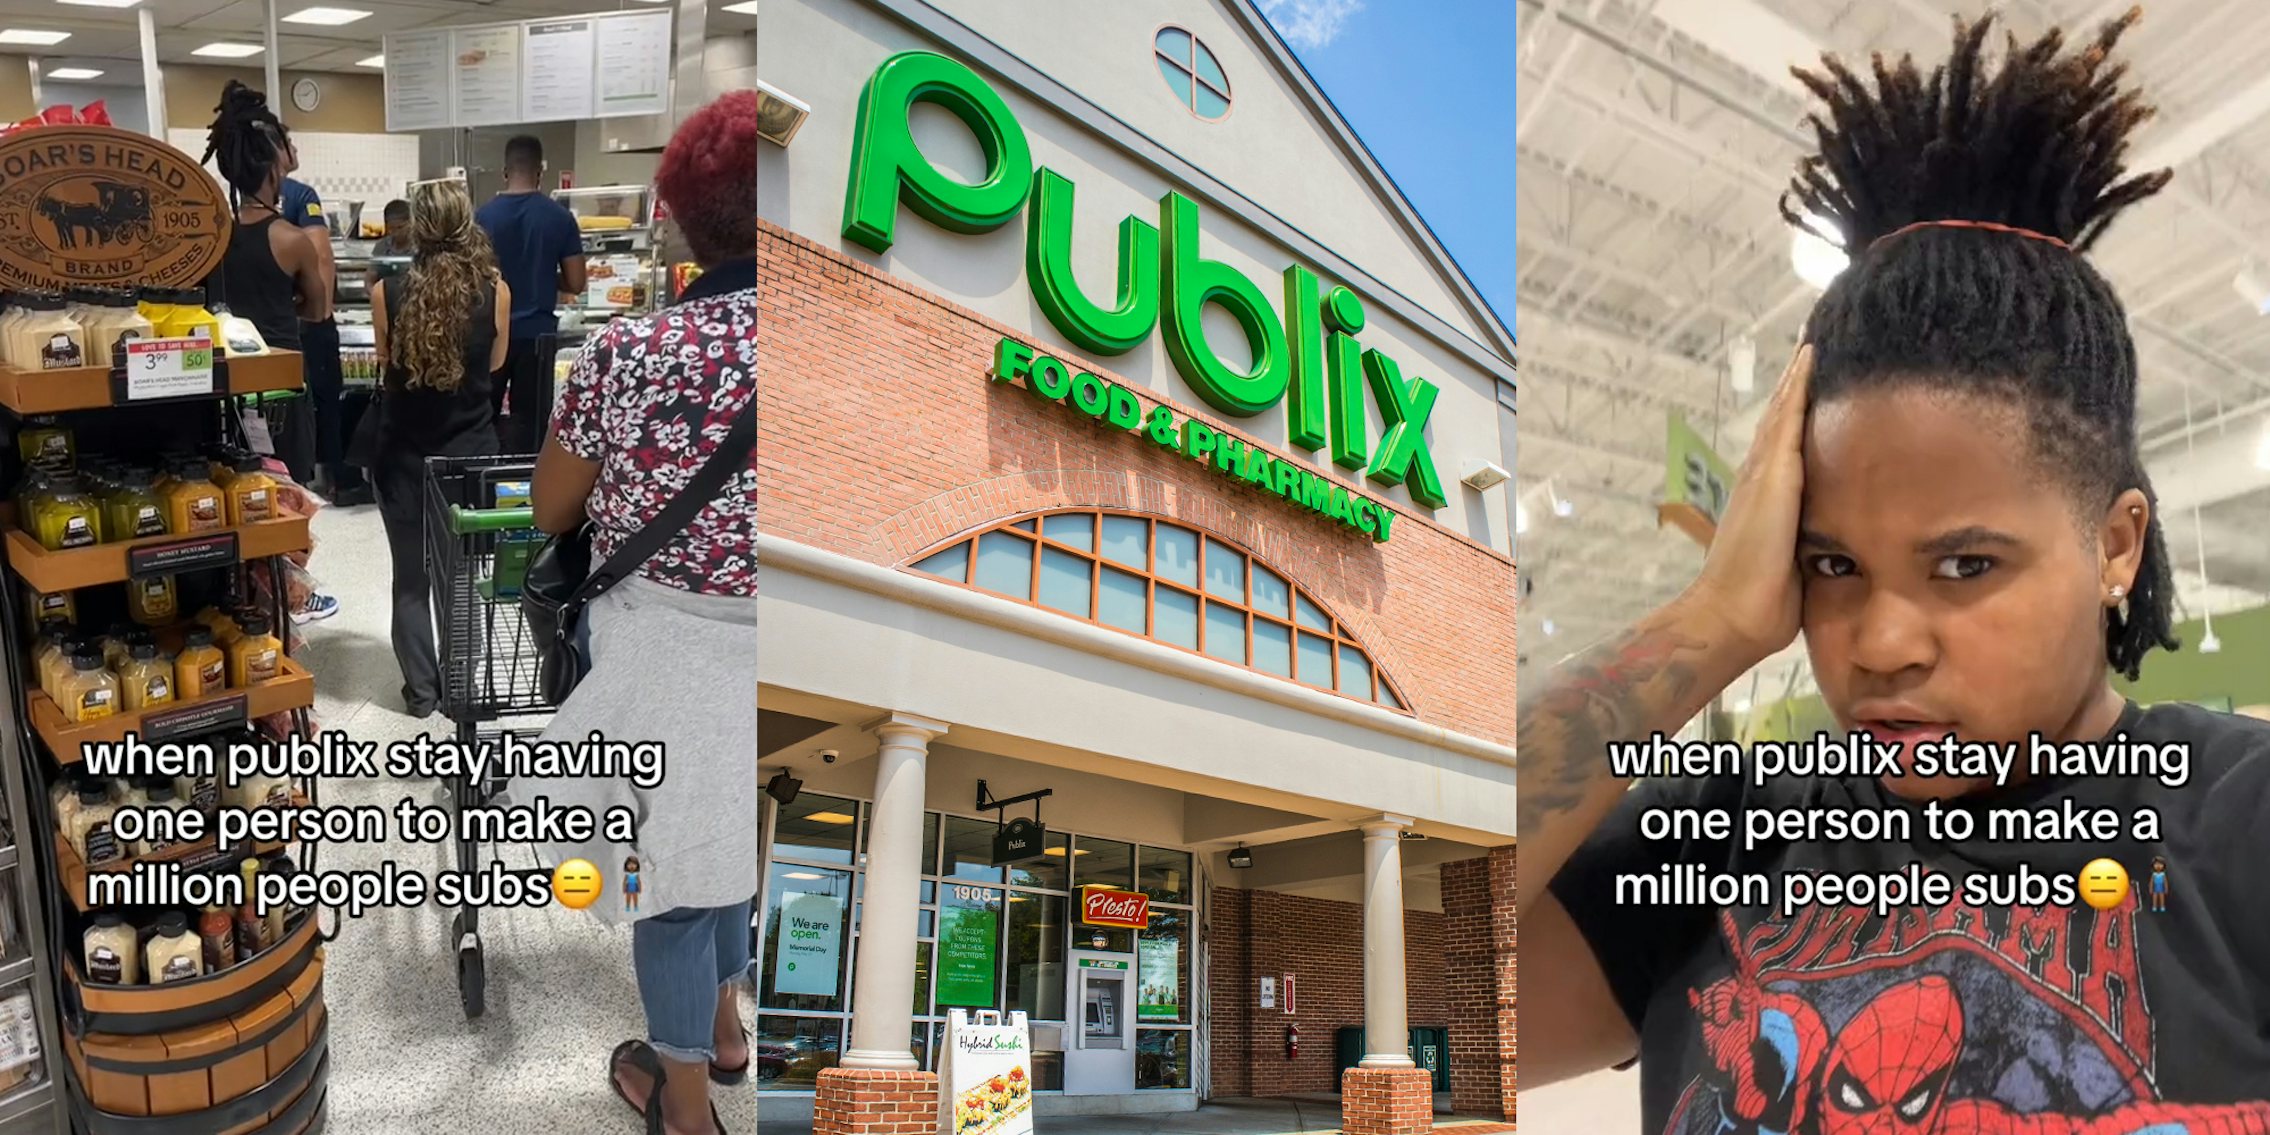 Publix customers in line with caption 'when publix stay having one person to make a million people subs' (l) Publix building entrance with sign (c) Publix customer with caption 'when publix stay having one person to make a million people subs' (r)